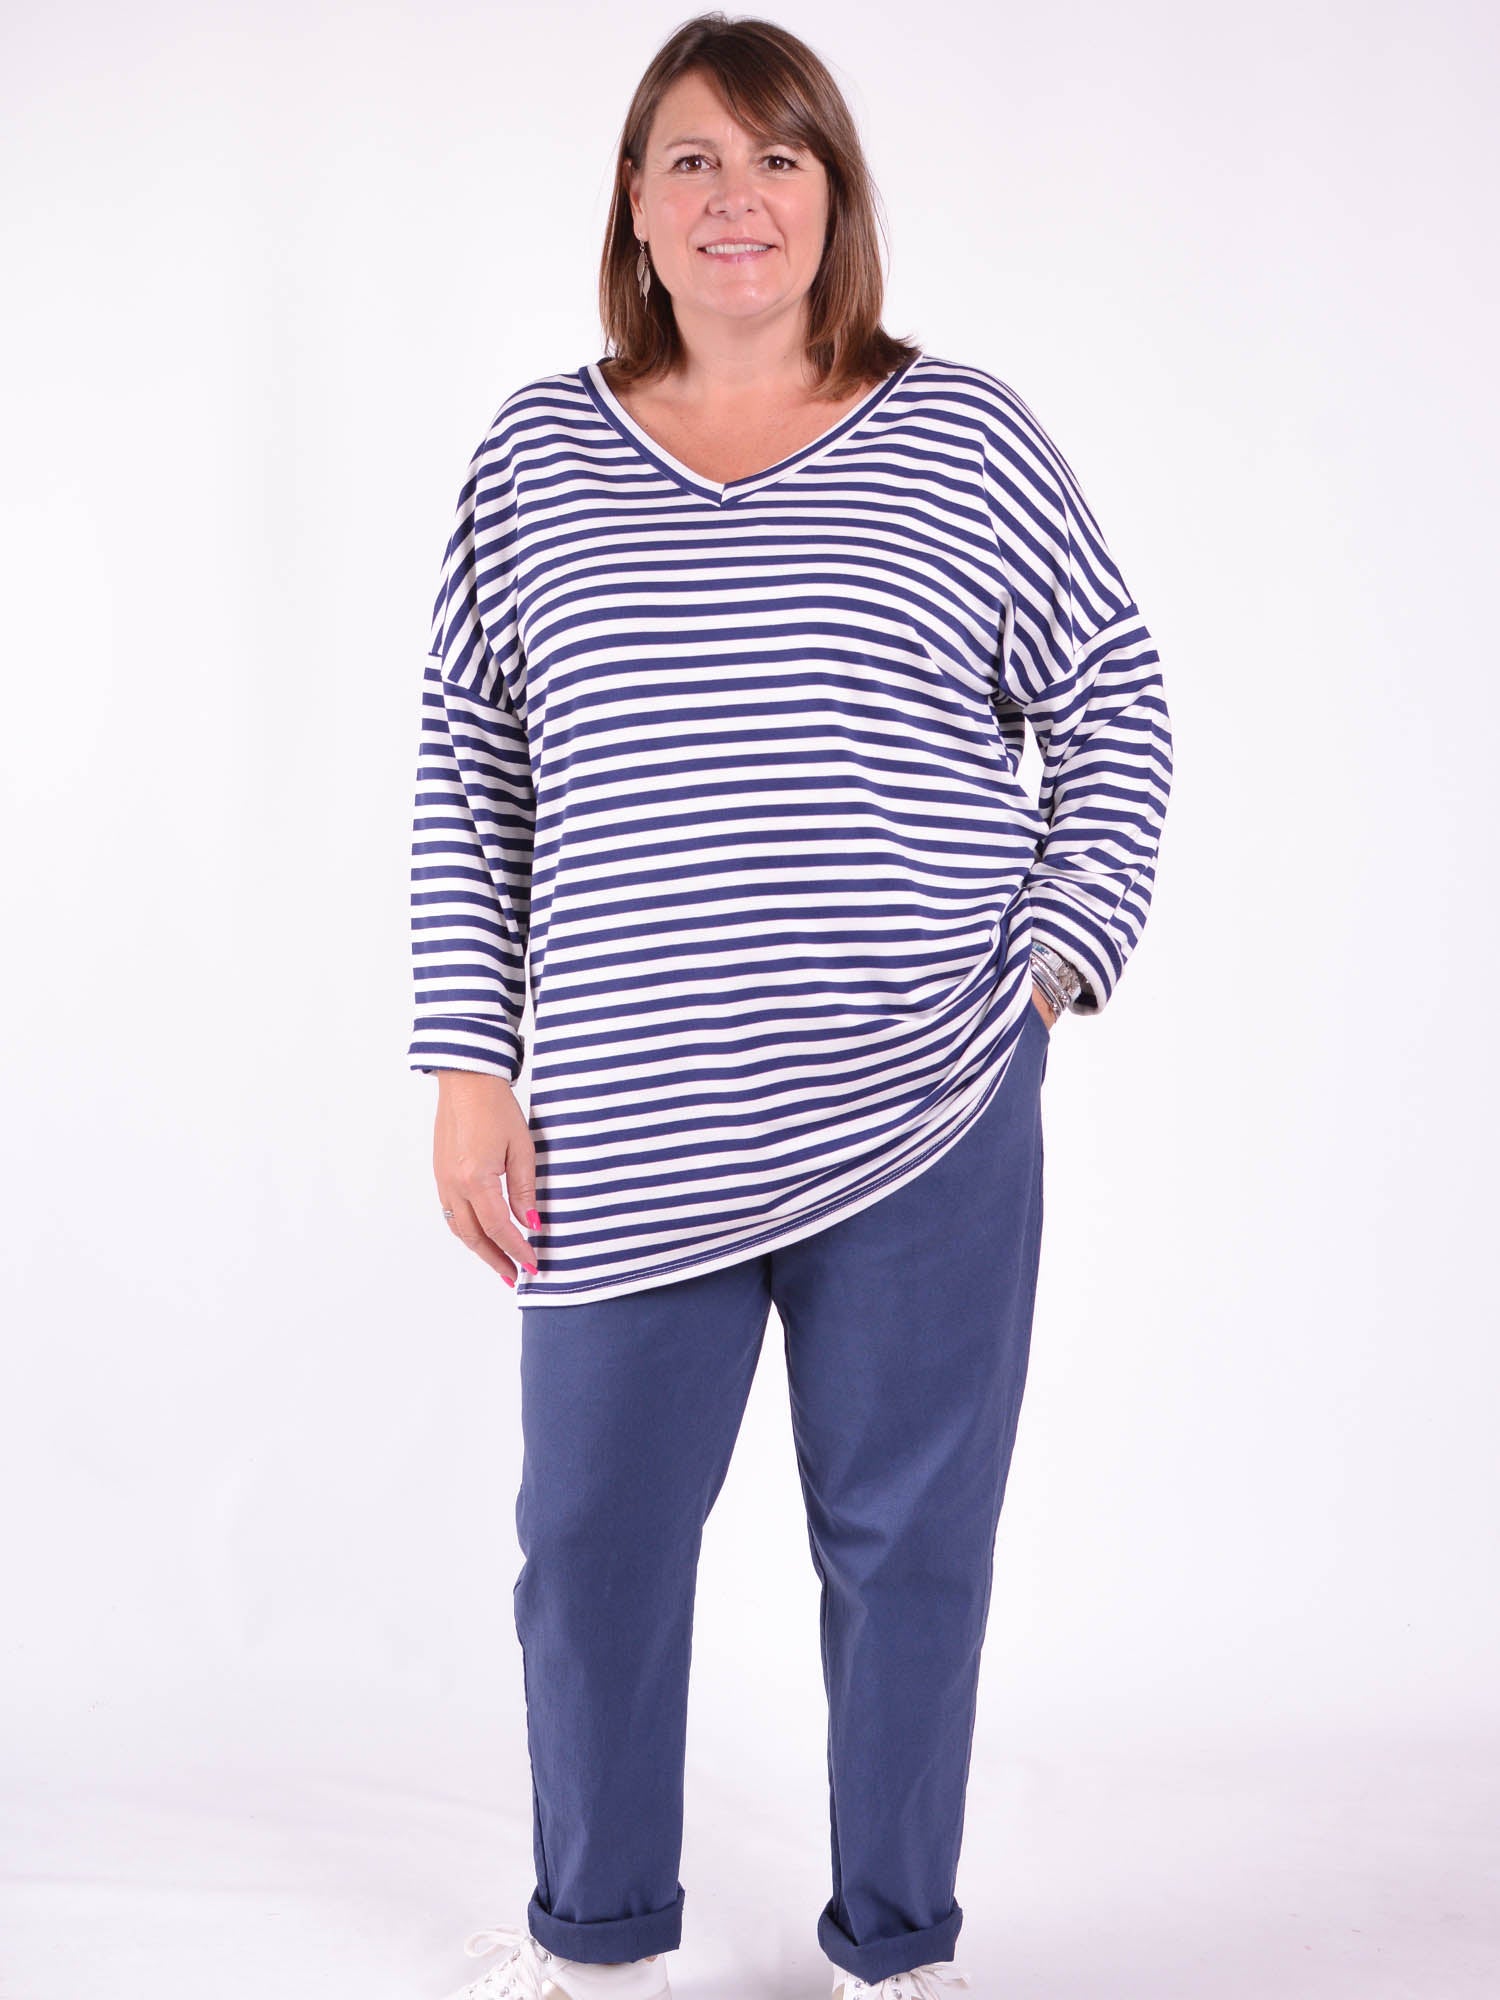 Striped V Neck Top - 11894, , Pure Plus Clothing, Lagenlook Clothing, Plus Size Fashion, Over 50 Fashion